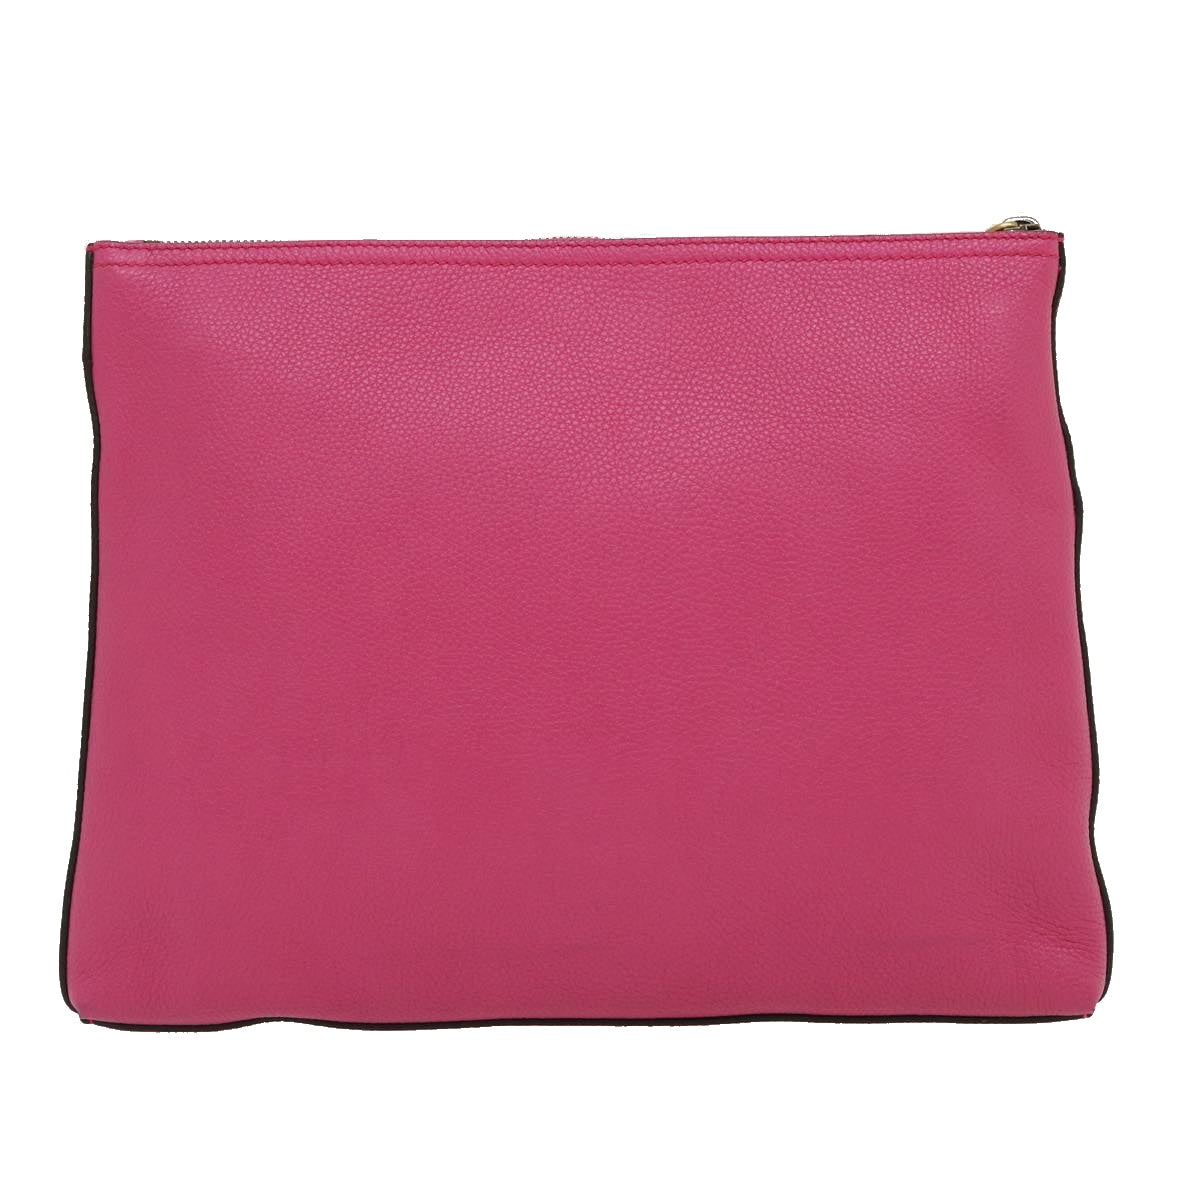 GUCCI Web Sherry Line Soho Clutch Bag Leather Pink Auth am481b - 0